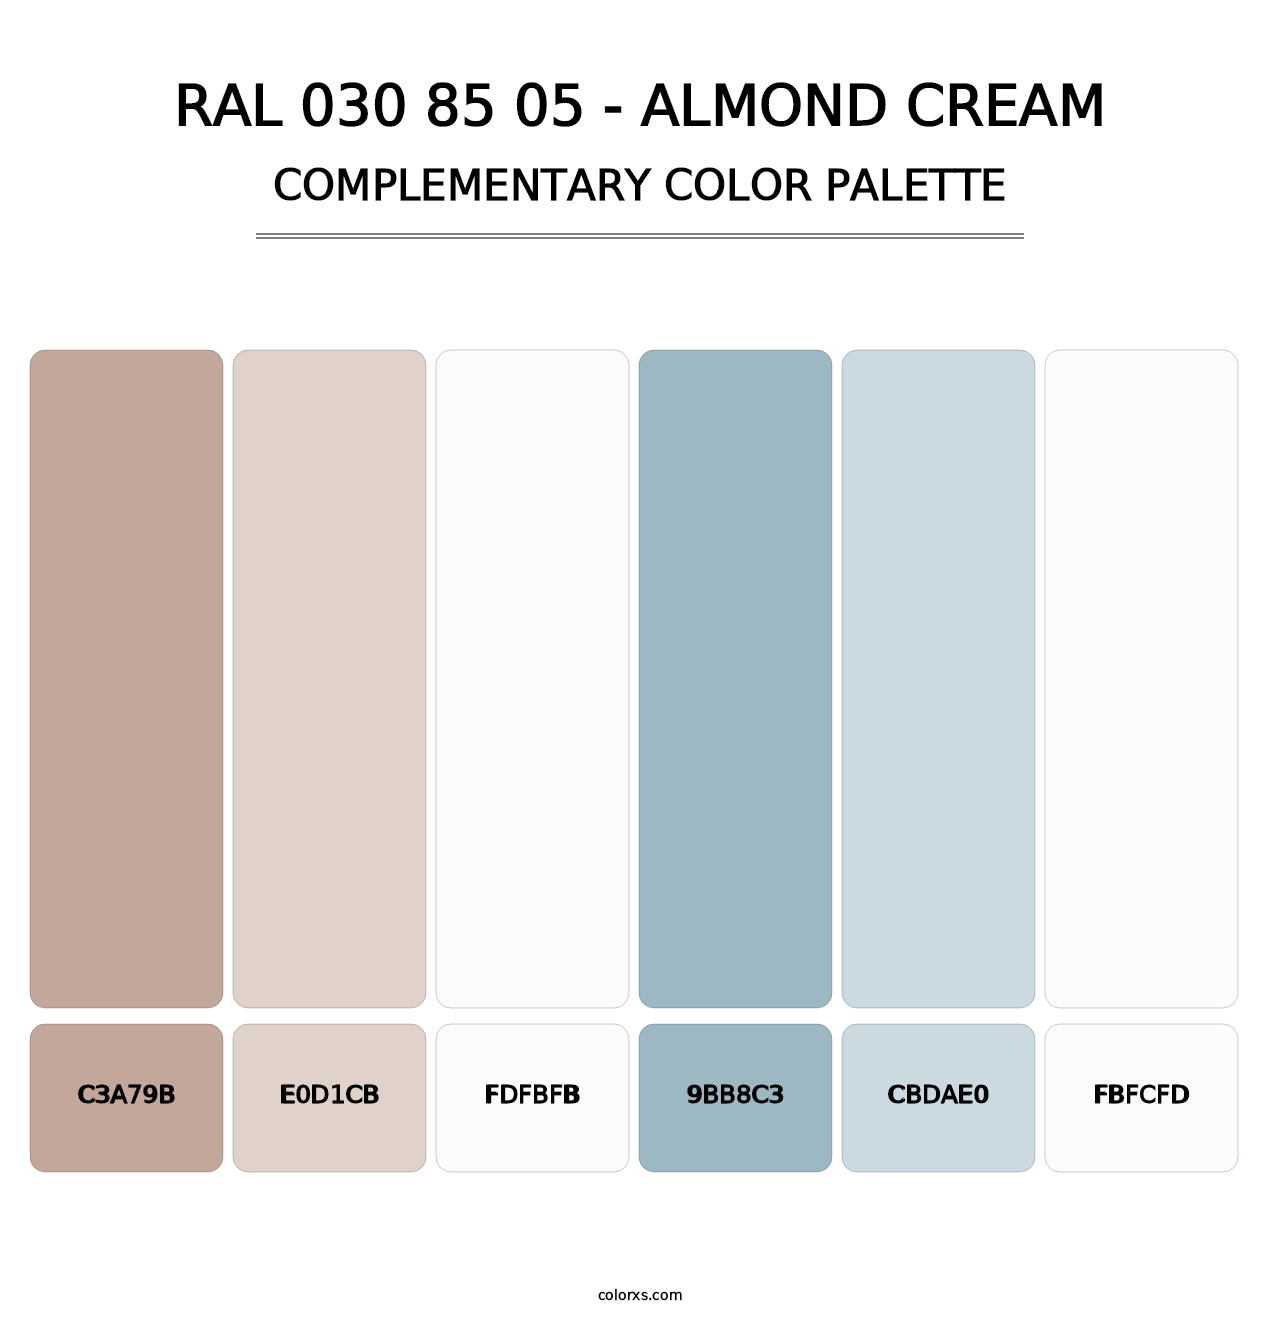 RAL 030 85 05 - Almond Cream - Complementary Color Palette